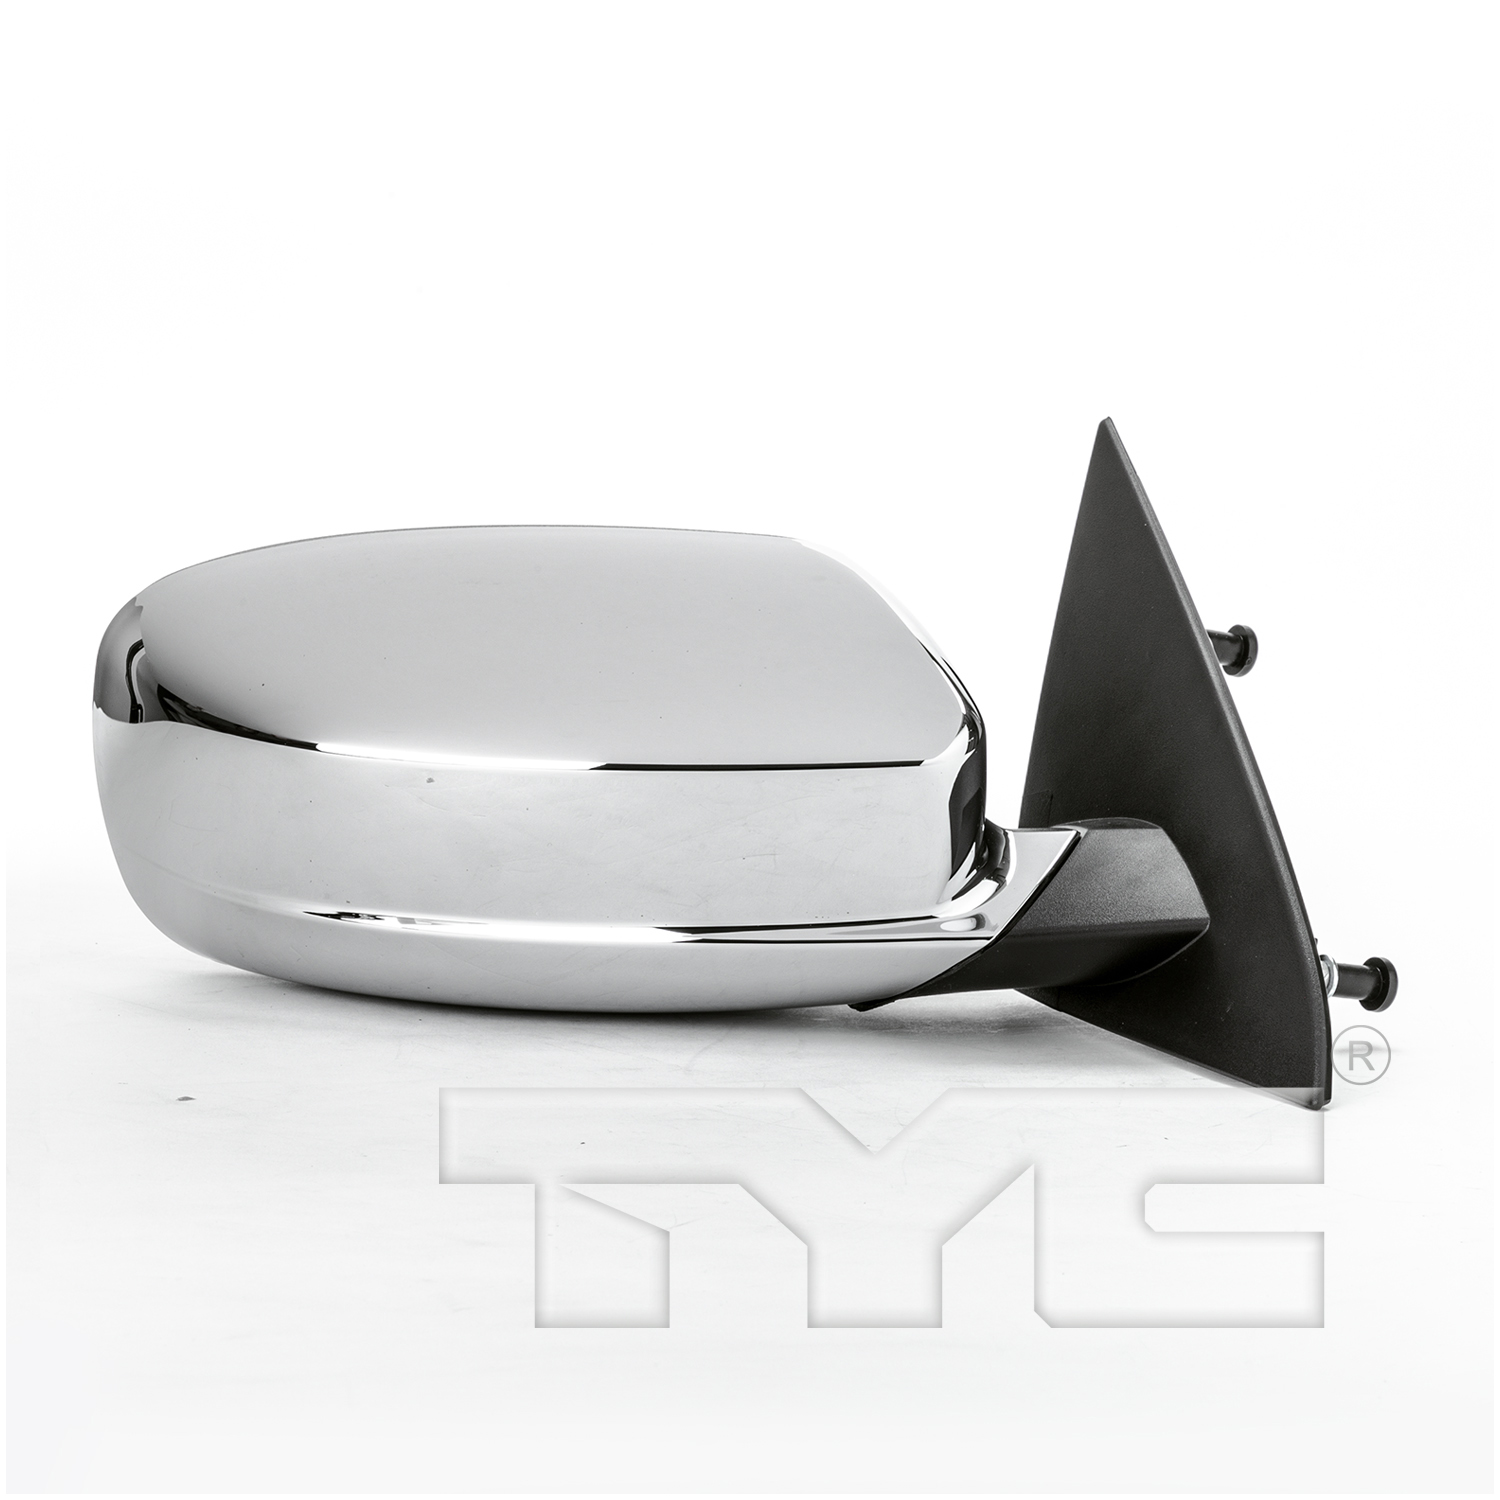 Aftermarket MIRRORS for CHRYSLER - 200, 200,11-14,RT Mirror outside rear view